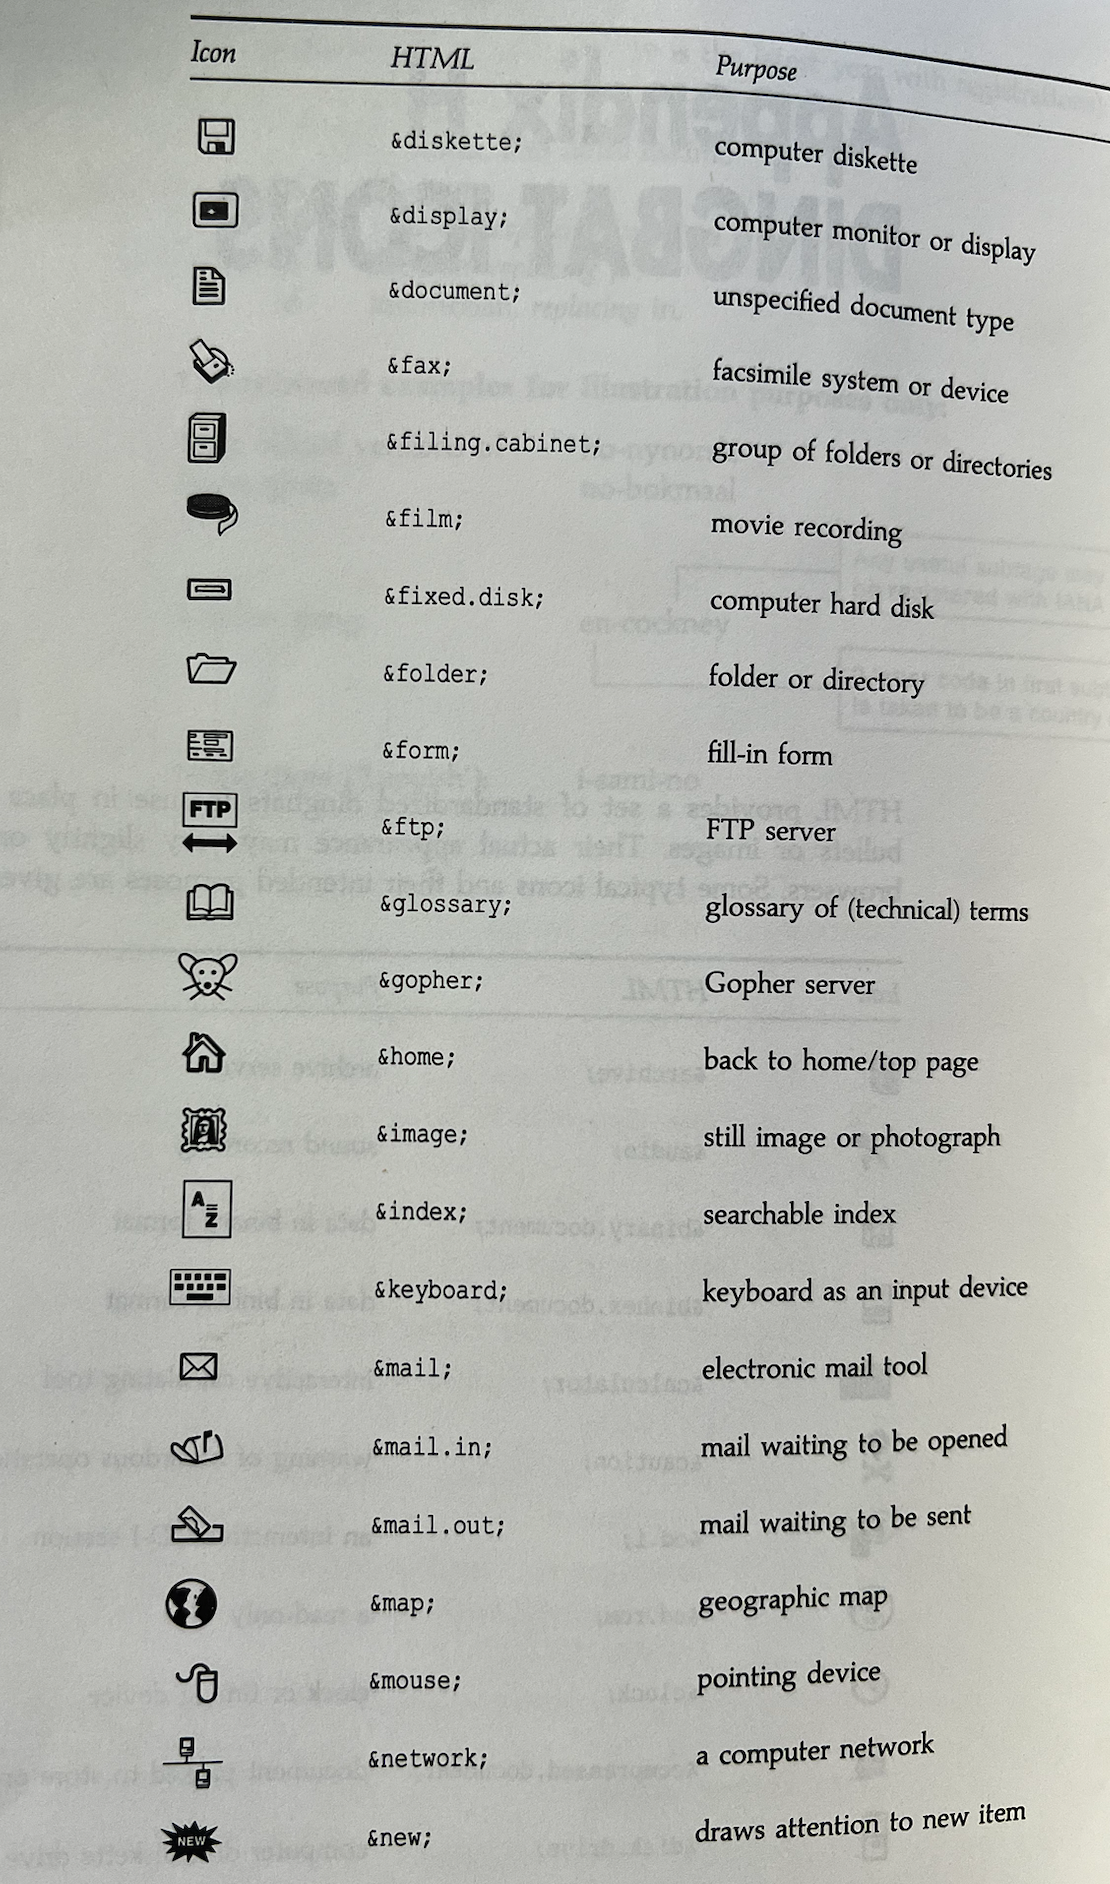 Page from an HTML book listing icons alongside their purpose and the html entity code